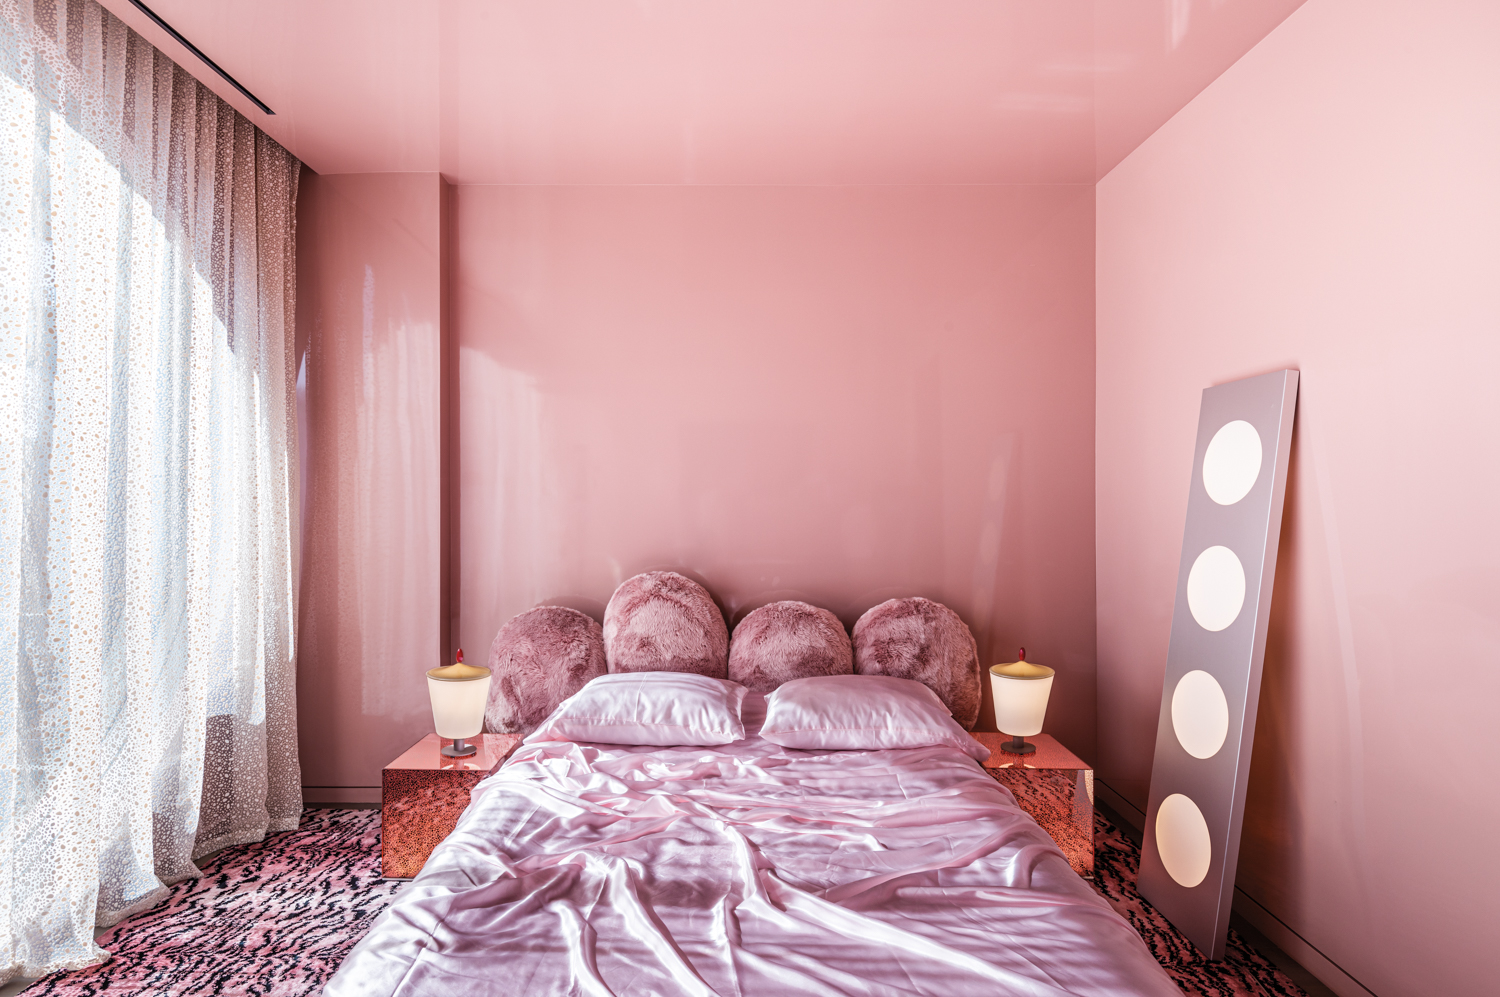 pink lacquer walls pink fuzzy bed